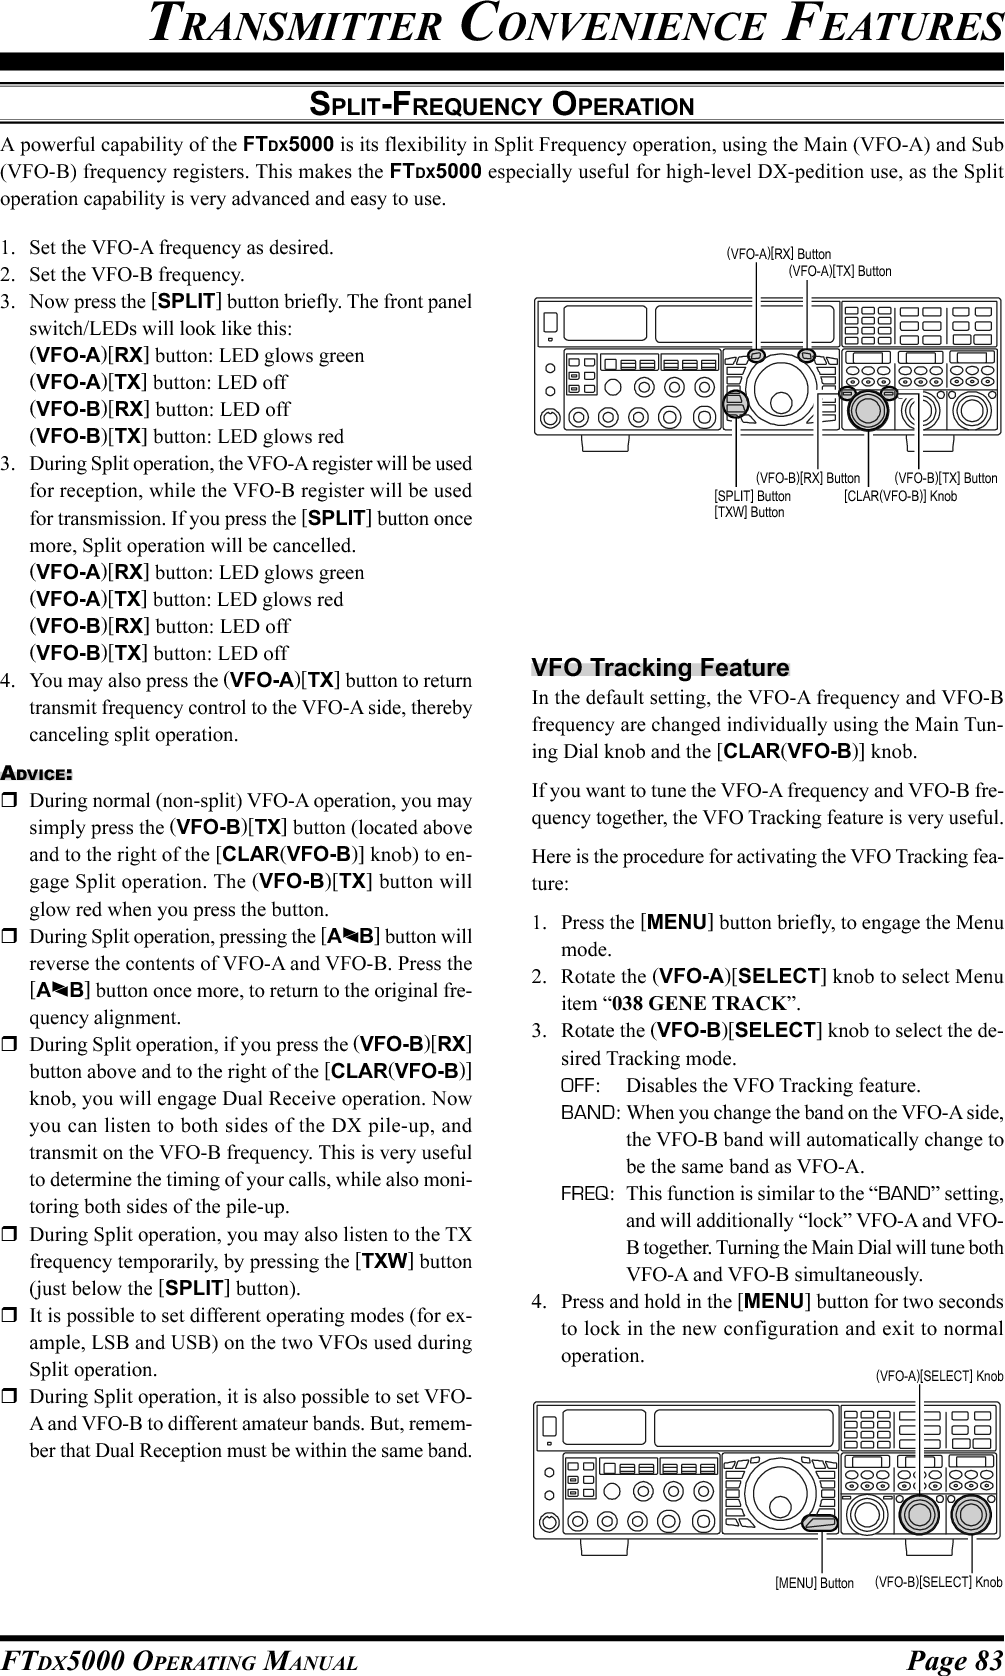 Page 83FTDX5000 OPERATING MANUALSPLIT-FREQUENCY OPERATIONA powerful capability of the FTDX5000 is its flexibility in Split Frequency operation, using the Main (VFO-A) and Sub(VFO-B) frequency registers. This makes the FTDX5000 especially useful for high-level DX-pedition use, as the Splitoperation capability is very advanced and easy to use.TRANSMITTER CONVENIENCE FEATURES1. Set the VFO-A frequency as desired.2. Set the VFO-B frequency.3. Now press the [SPLIT] button briefly. The front panelswitch/LEDs will look like this:(VFO-A)[RX] button: LED glows green(VFO-A)[TX] button: LED off(VFO-B)[RX] button: LED off(VFO-B)[TX] button: LED glows red3. During Split operation, the VFO-A register will be usedfor reception, while the VFO-B register will be usedfor transmission. If you press the [SPLIT] button oncemore, Split operation will be cancelled.(VFO-A)[RX] button: LED glows green(VFO-A)[TX] button: LED glows red(VFO-B)[RX] button: LED off(VFO-B)[TX] button: LED off4. You may also press the (VFO-A)[TX] button to returntransmit frequency control to the VFO-A side, therebycanceling split operation.ADVICE:During normal (non-split) VFO-A operation, you maysimply press the (VFO-B)[TX] button (located aboveand to the right of the [CLAR(VFO-B)] knob) to en-gage Split operation. The (VFO-B)[TX] button willglow red when you press the button.During Split operation, pressing the [AB] button willreverse the contents of VFO-A and VFO-B. Press the[AB] button once more, to return to the original fre-quency alignment.During Split operation, if you press the (VFO-B)[RX]button above and to the right of the [CLAR(VFO-B)]knob, you will engage Dual Receive operation. Nowyou can listen to both sides of the DX pile-up, andtransmit on the VFO-B frequency. This is very usefulto determine the timing of your calls, while also moni-toring both sides of the pile-up.During Split operation, you may also listen to the TXfrequency temporarily, by pressing the [TXW] button(just below the [SPLIT] button).It is possible to set different operating modes (for ex-ample, LSB and USB) on the two VFOs used duringSplit operation.During Split operation, it is also possible to set VFO-A and VFO-B to different amateur bands. But, remem-ber that Dual Reception must be within the same band.VFO Tracking FeatureIn the default setting, the VFO-A frequency and VFO-Bfrequency are changed individually using the Main Tun-ing Dial knob and the [CLAR(VFO-B)] knob.If you want to tune the VFO-A frequency and VFO-B fre-quency together, the VFO Tracking feature is very useful.Here is the procedure for activating the VFO Tracking fea-ture:1. Press the [MENU] button briefly, to engage the Menumode.2. Rotate the (VFO-A)[SELECT] knob to select Menuitem “038 GENE TRACK”.3. Rotate the (VFO-B)[SELECT] knob to select the de-sired Tracking mode.OFF: Disables the VFO Tracking feature.BAND: When you change the band on the VFO-A side,the VFO-B band will automatically change tobe the same band as VFO-A.FREQ: This function is similar to the “BAND” setting,and will additionally “lock” VFO-A and VFO-B together. Turning the Main Dial will tune bothVFO-A and VFO-B simultaneously.4. Press and hold in the [MENU] button for two secondsto lock in the new configuration and exit to normaloperation.(VFO-B)[SELECT] Knob[MENU] Button(VFO-A)[SELECT] Knob[CLAR(VFO-B)] Knob(VFO-B)[TX] Button(VFO-B)[RX] Button[SPLIT] Button[TXW] Button(VFO-A)[TX] Button(VFO-A)[RX] Button